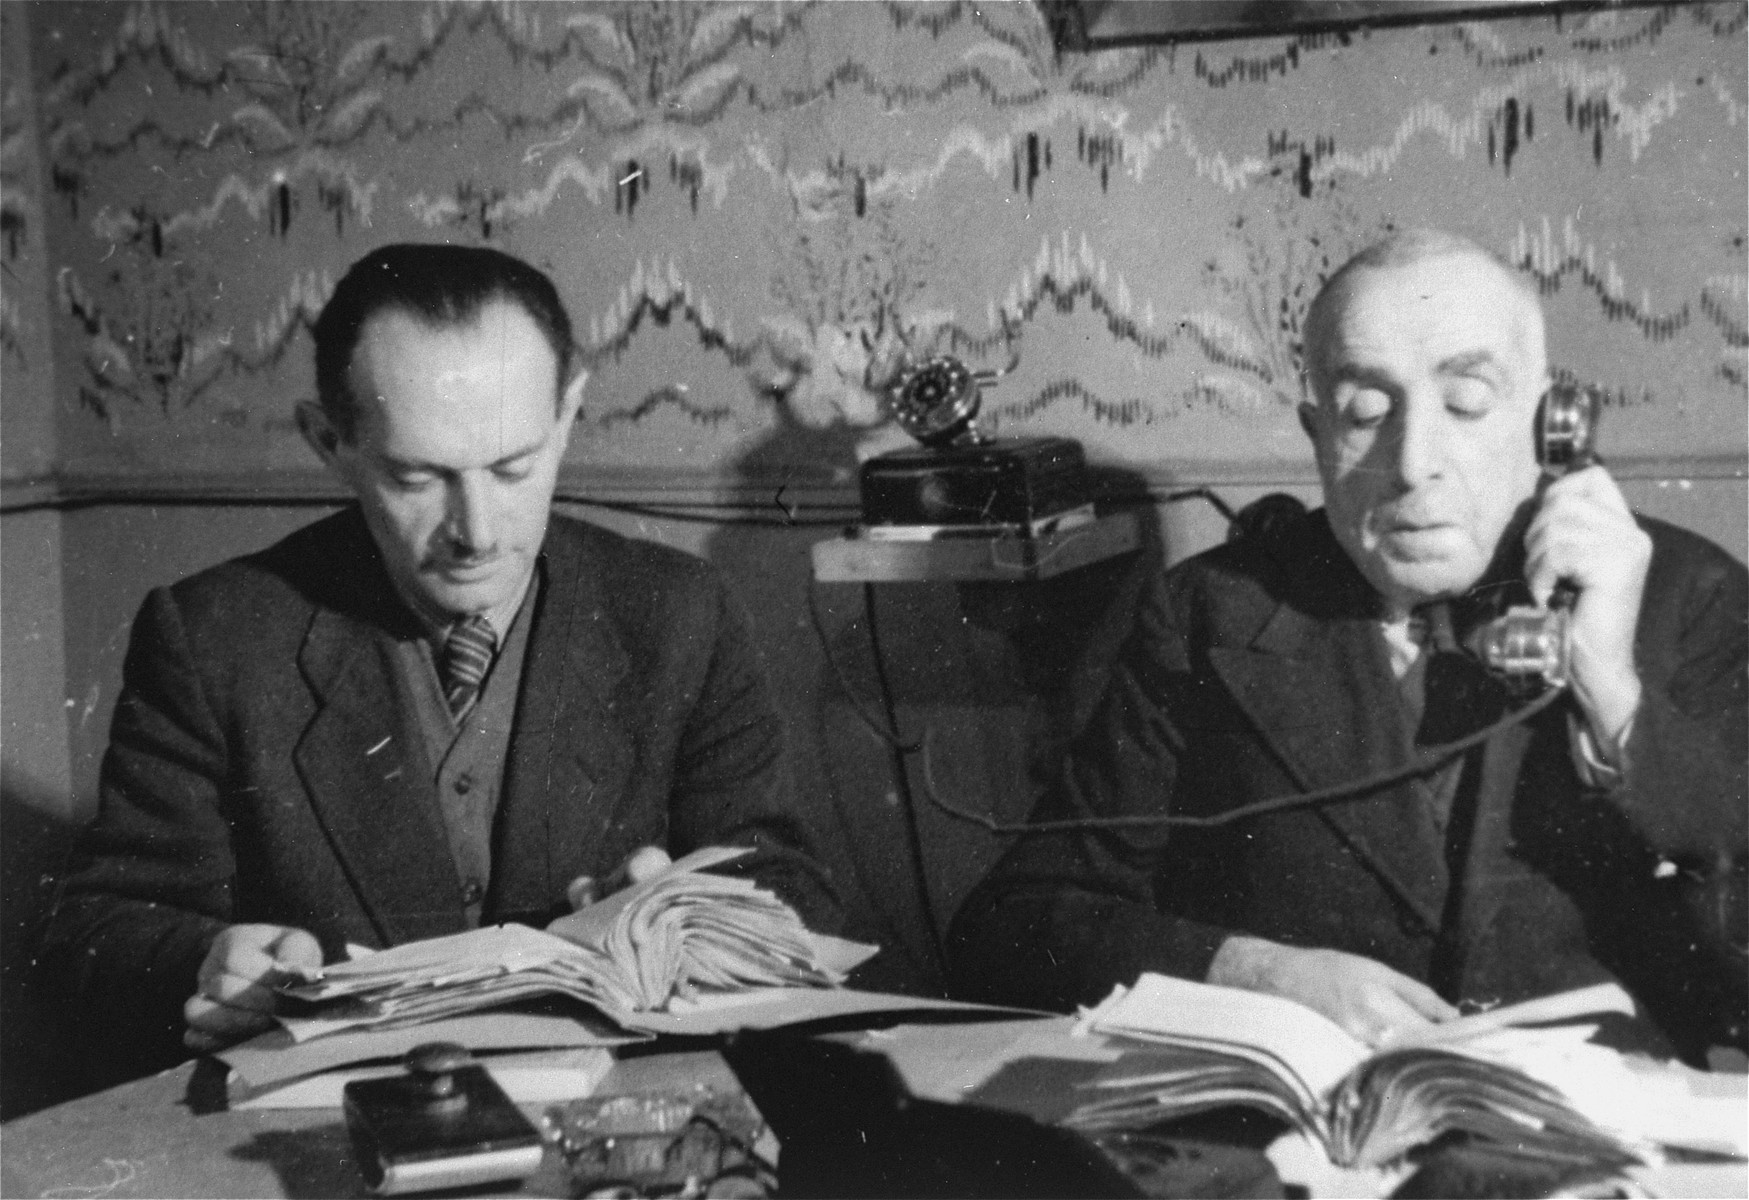 Two members of the ghetto administration at work in the office of the Judenrat in the Kielce ghetto.

This photo was one the images included in an official album prepared by the Judenrat of the Kielce ghetto in 1942.